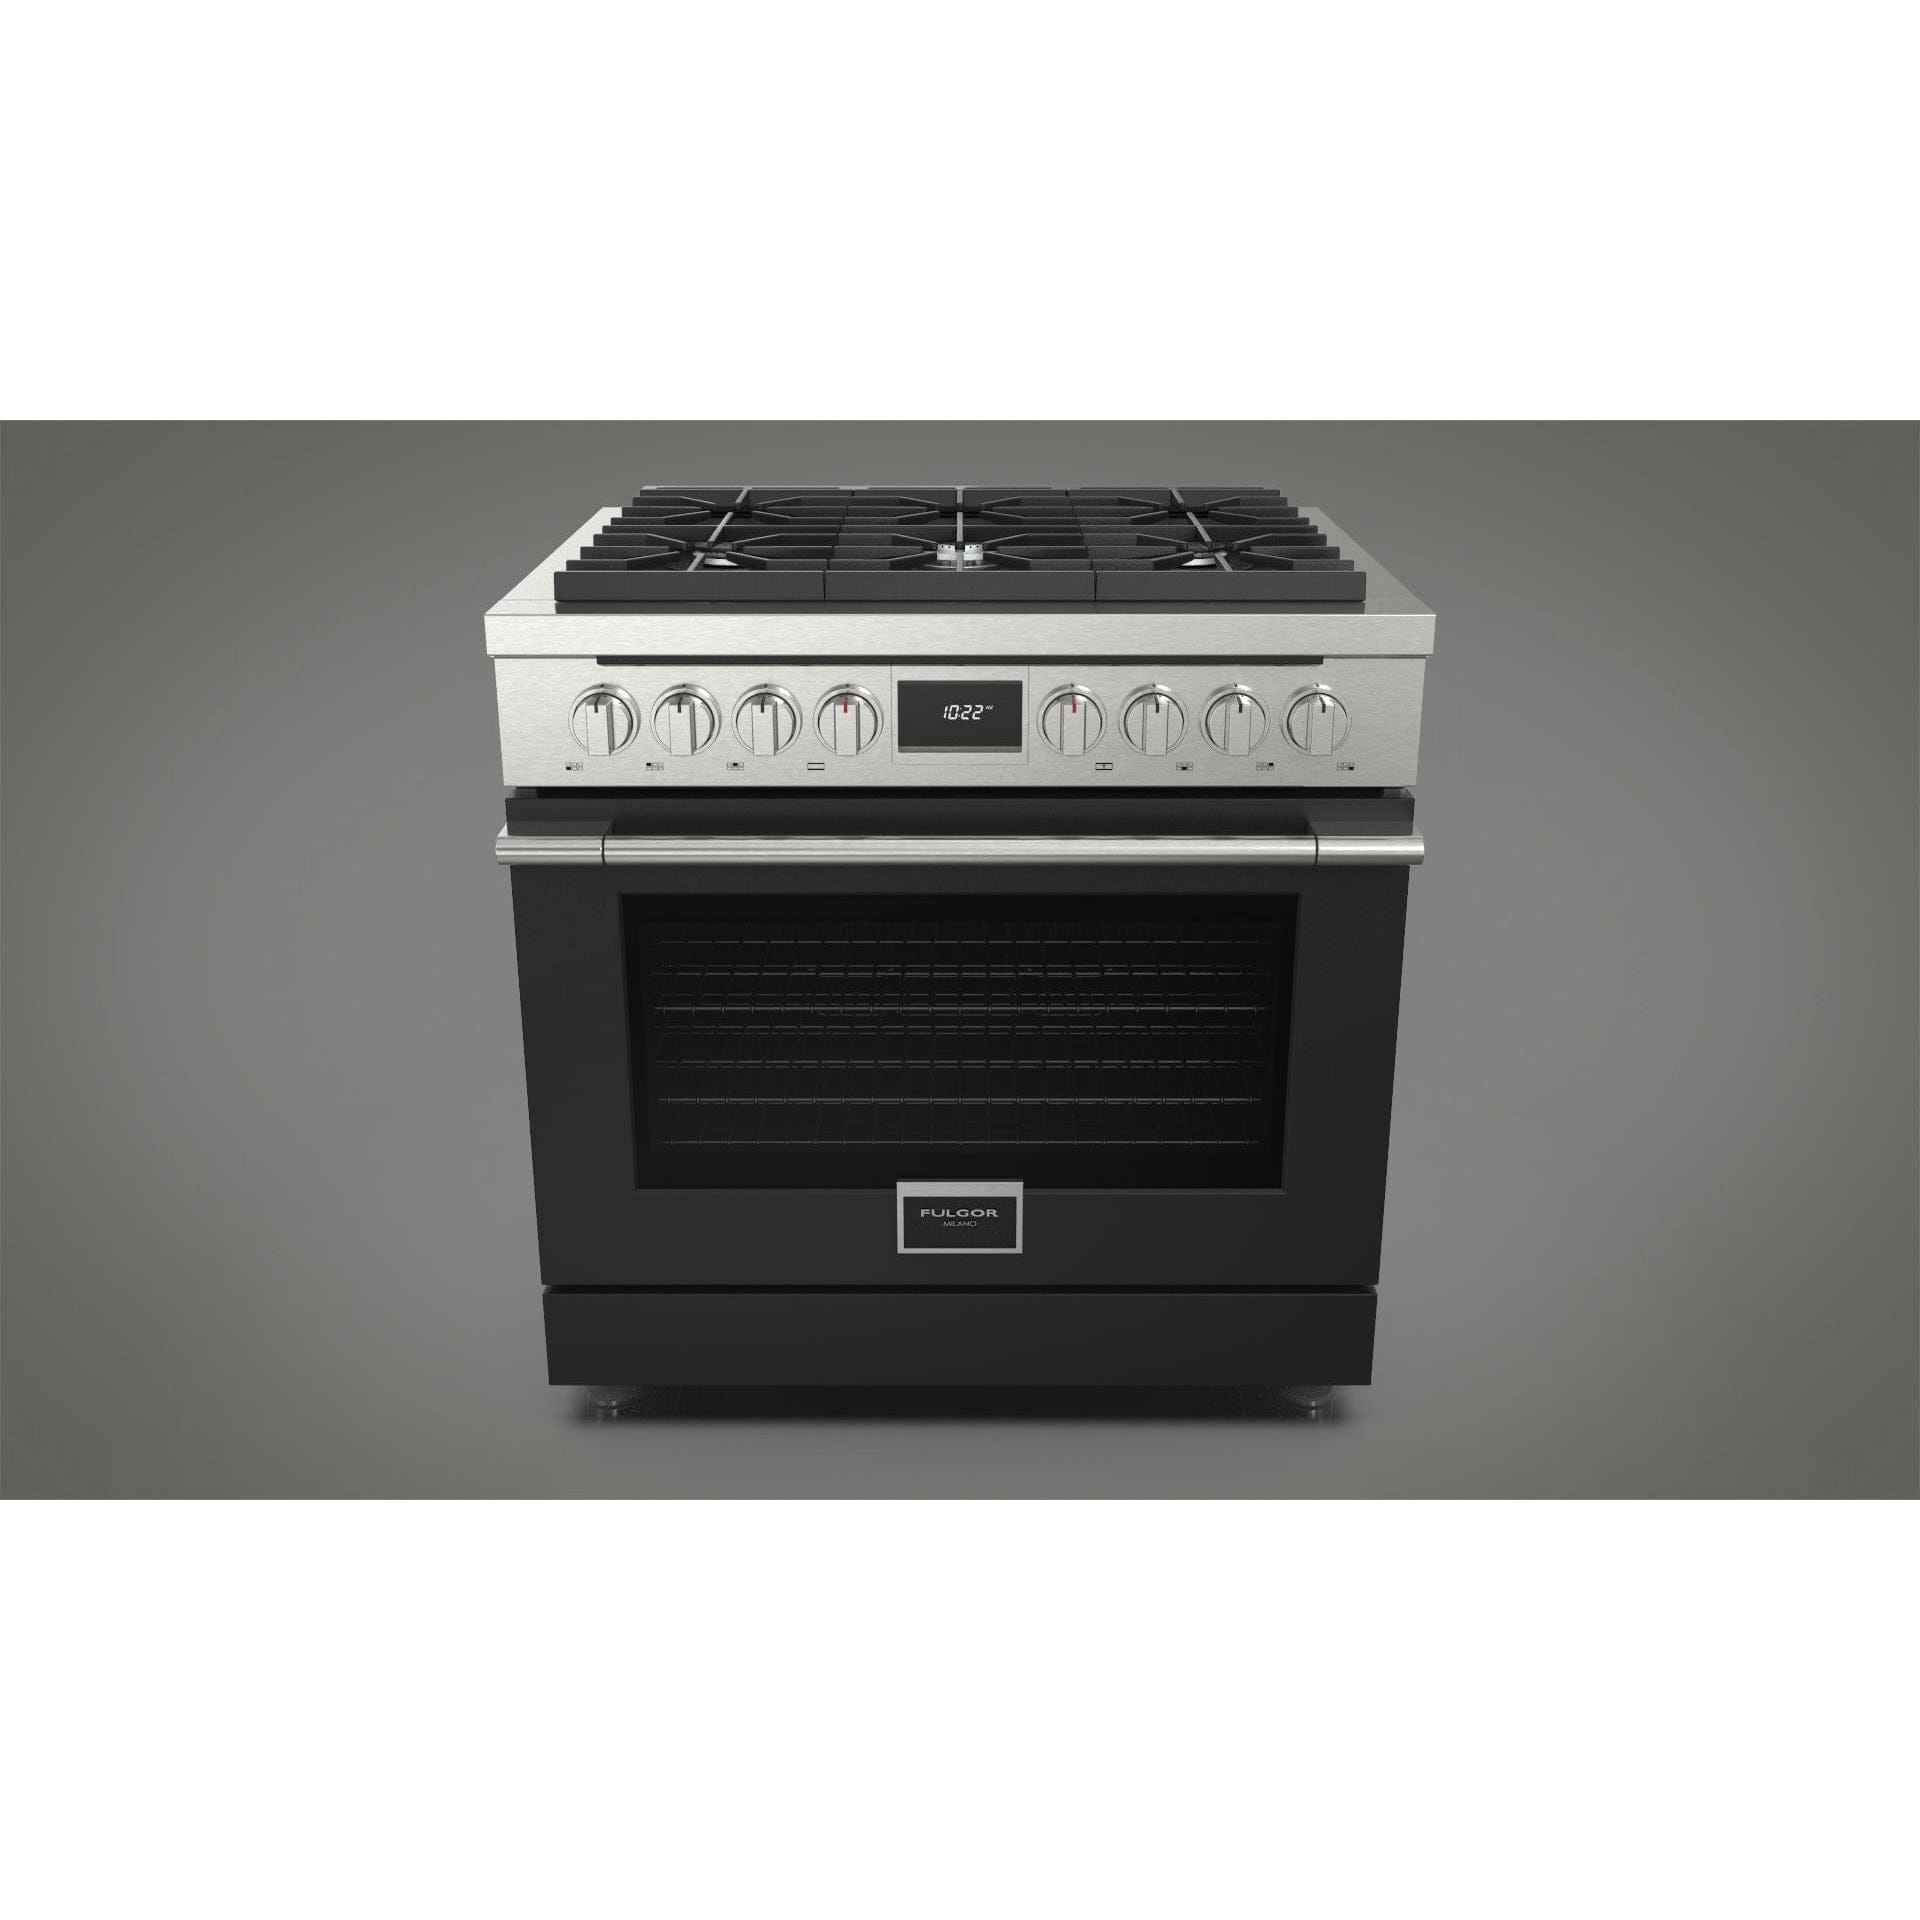 Fulgor Milano 36" Pro-Style Dual Fuel Range with 5.7 Cu. Ft. Capacity, Stainless Steel - F4PDF366S1 Ranges ACDKIT36MB Luxury Appliances Direct